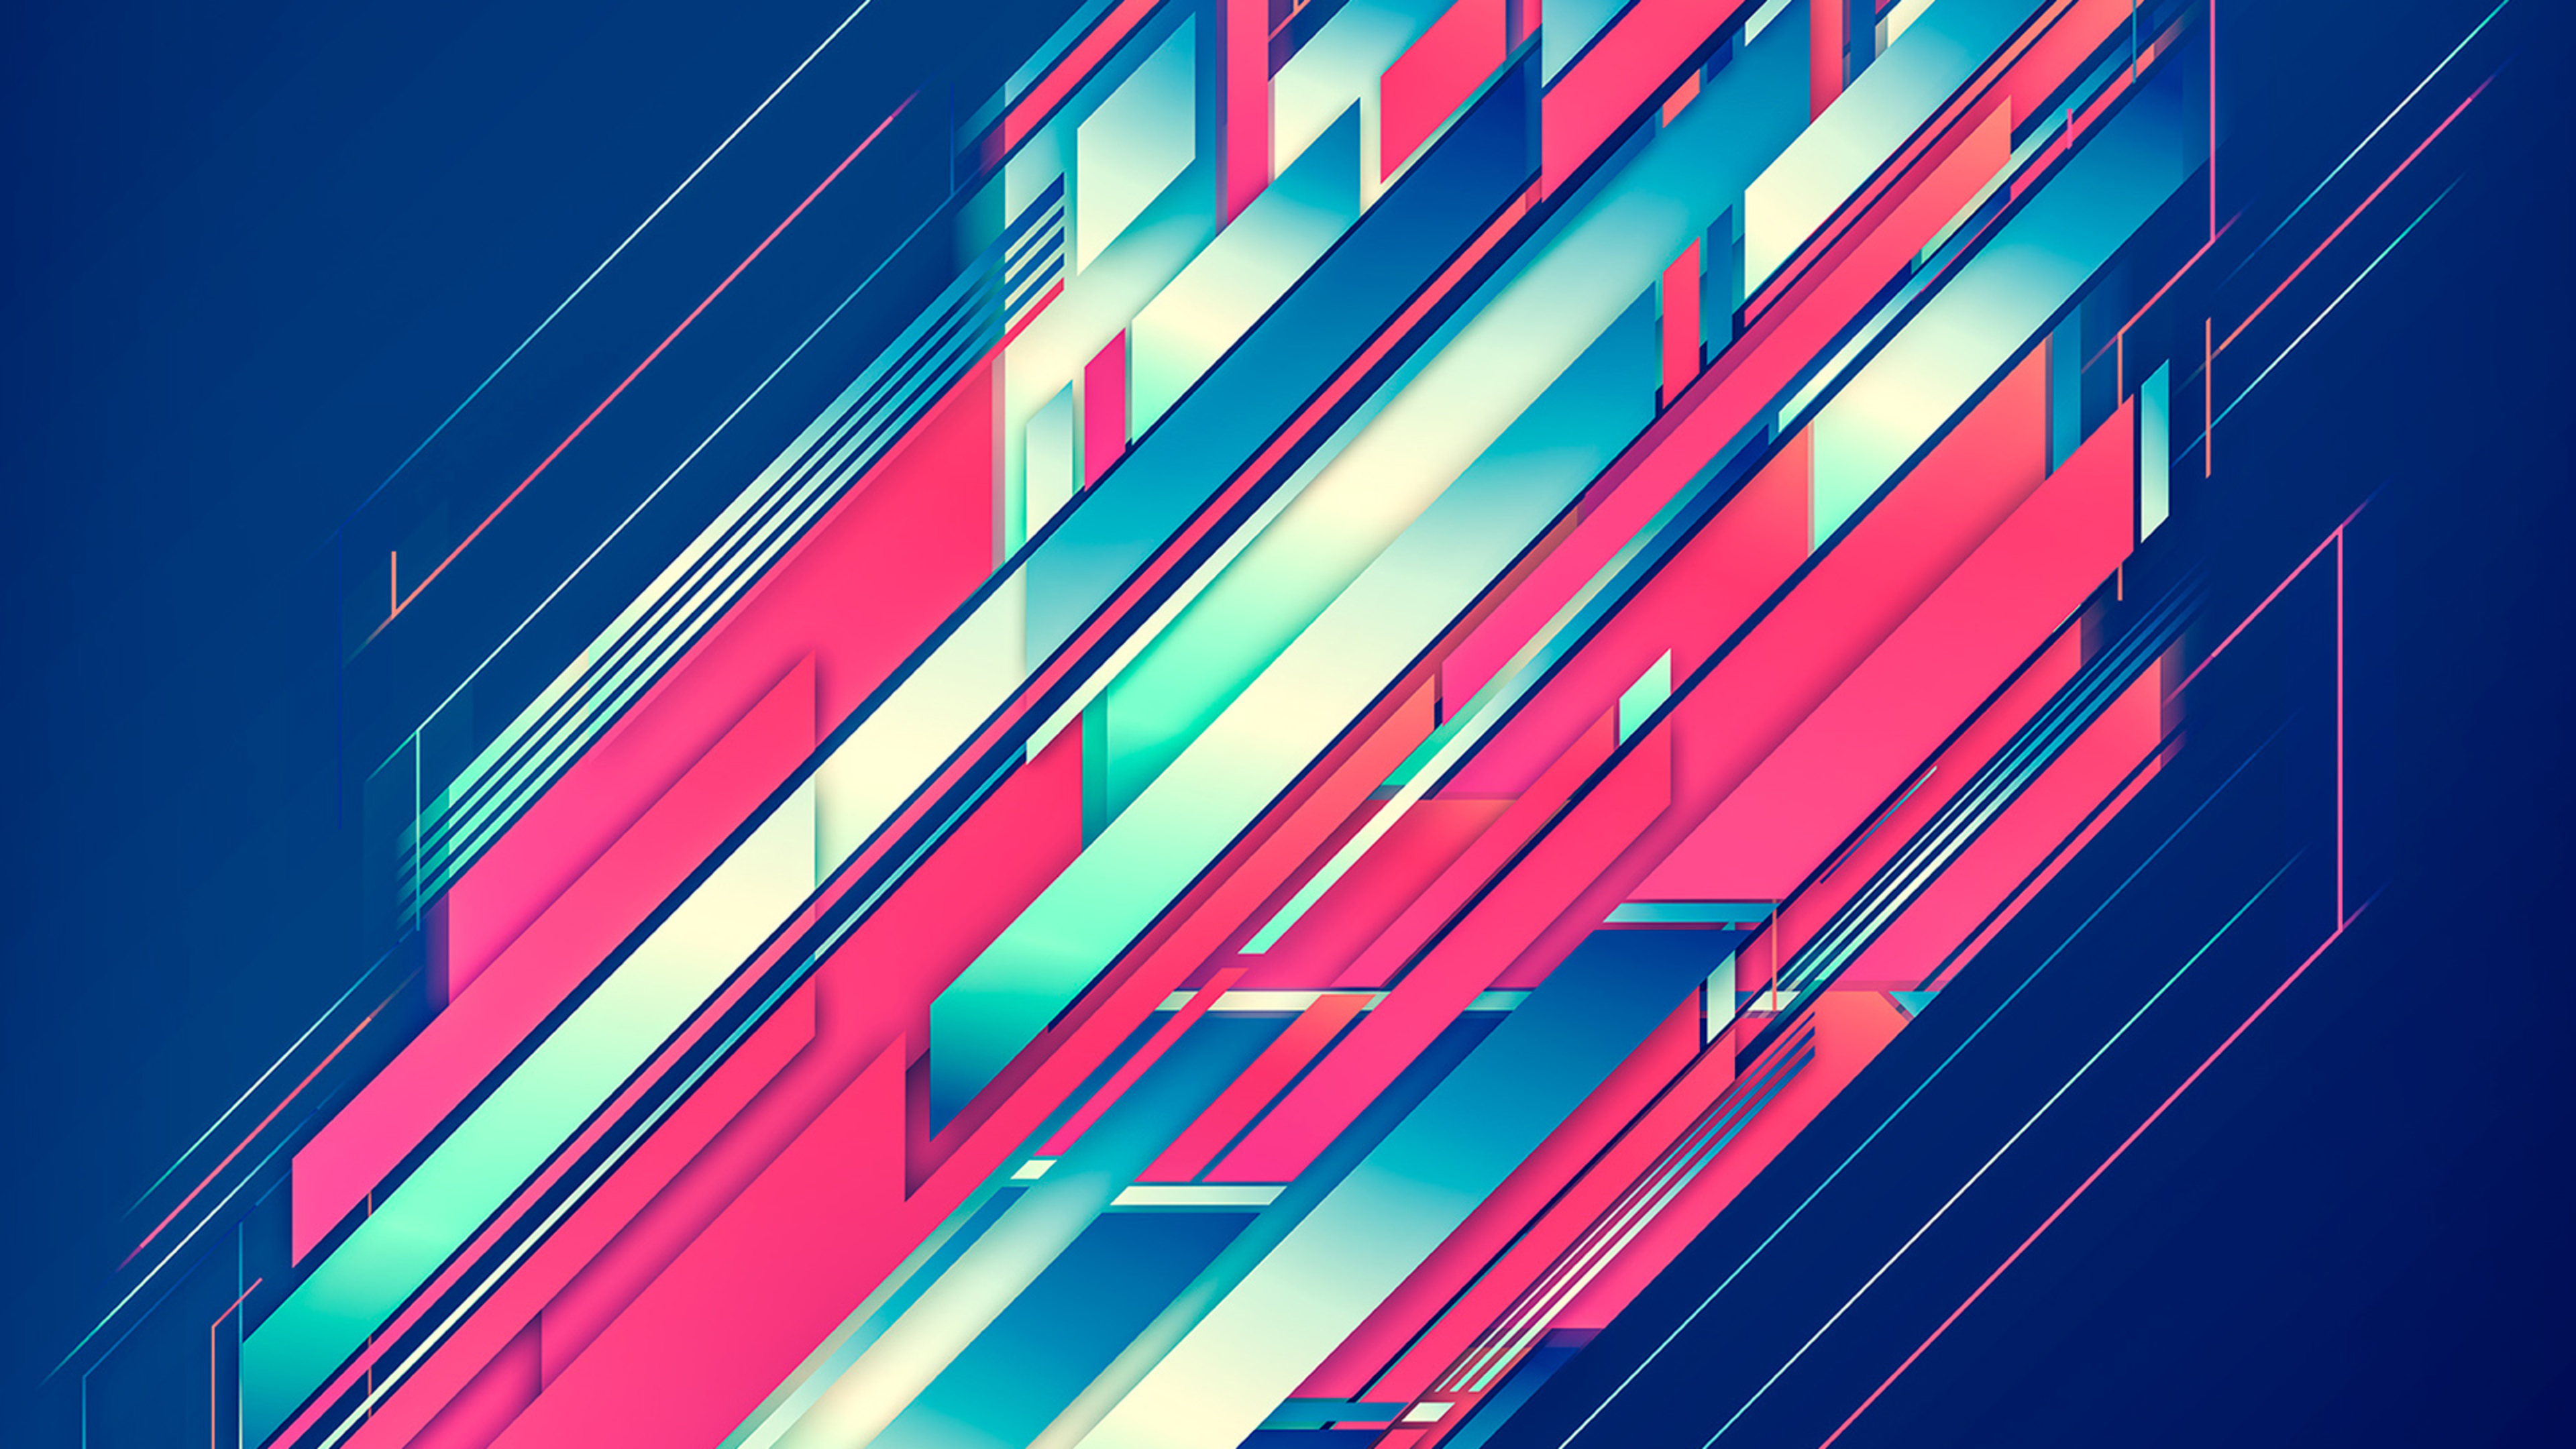 Abstract Graphic Design Wallpaper In 3840x2160 Resolution